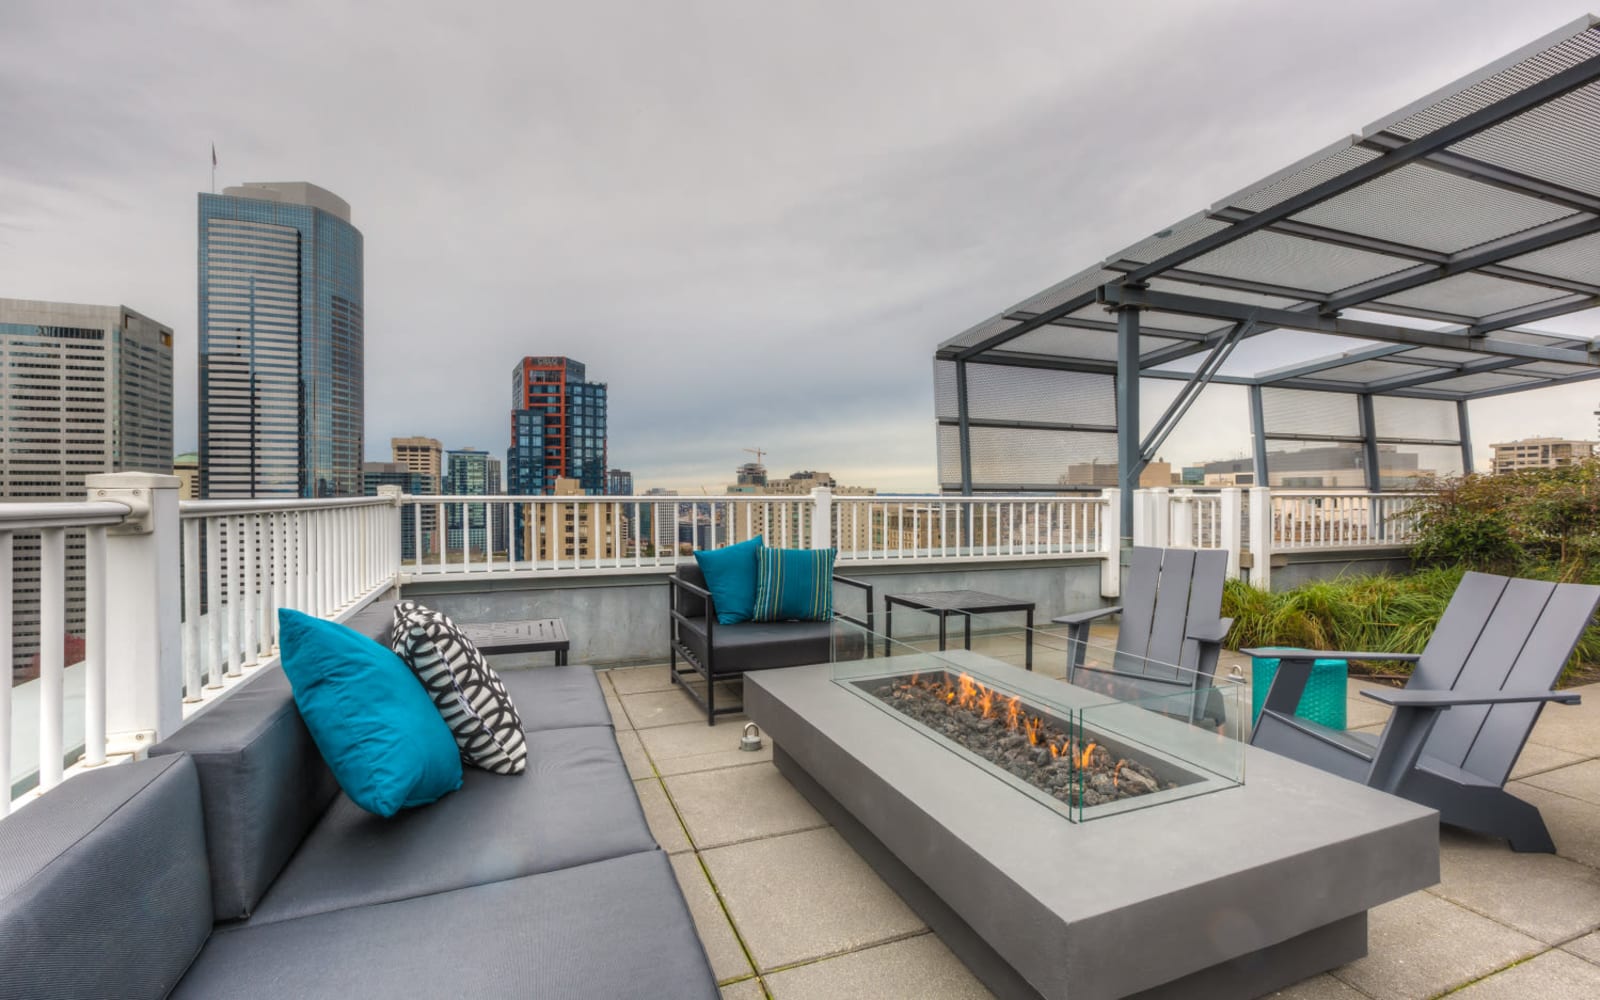 Rooftop patio seating and firepit at M Street in Seattle, Washington